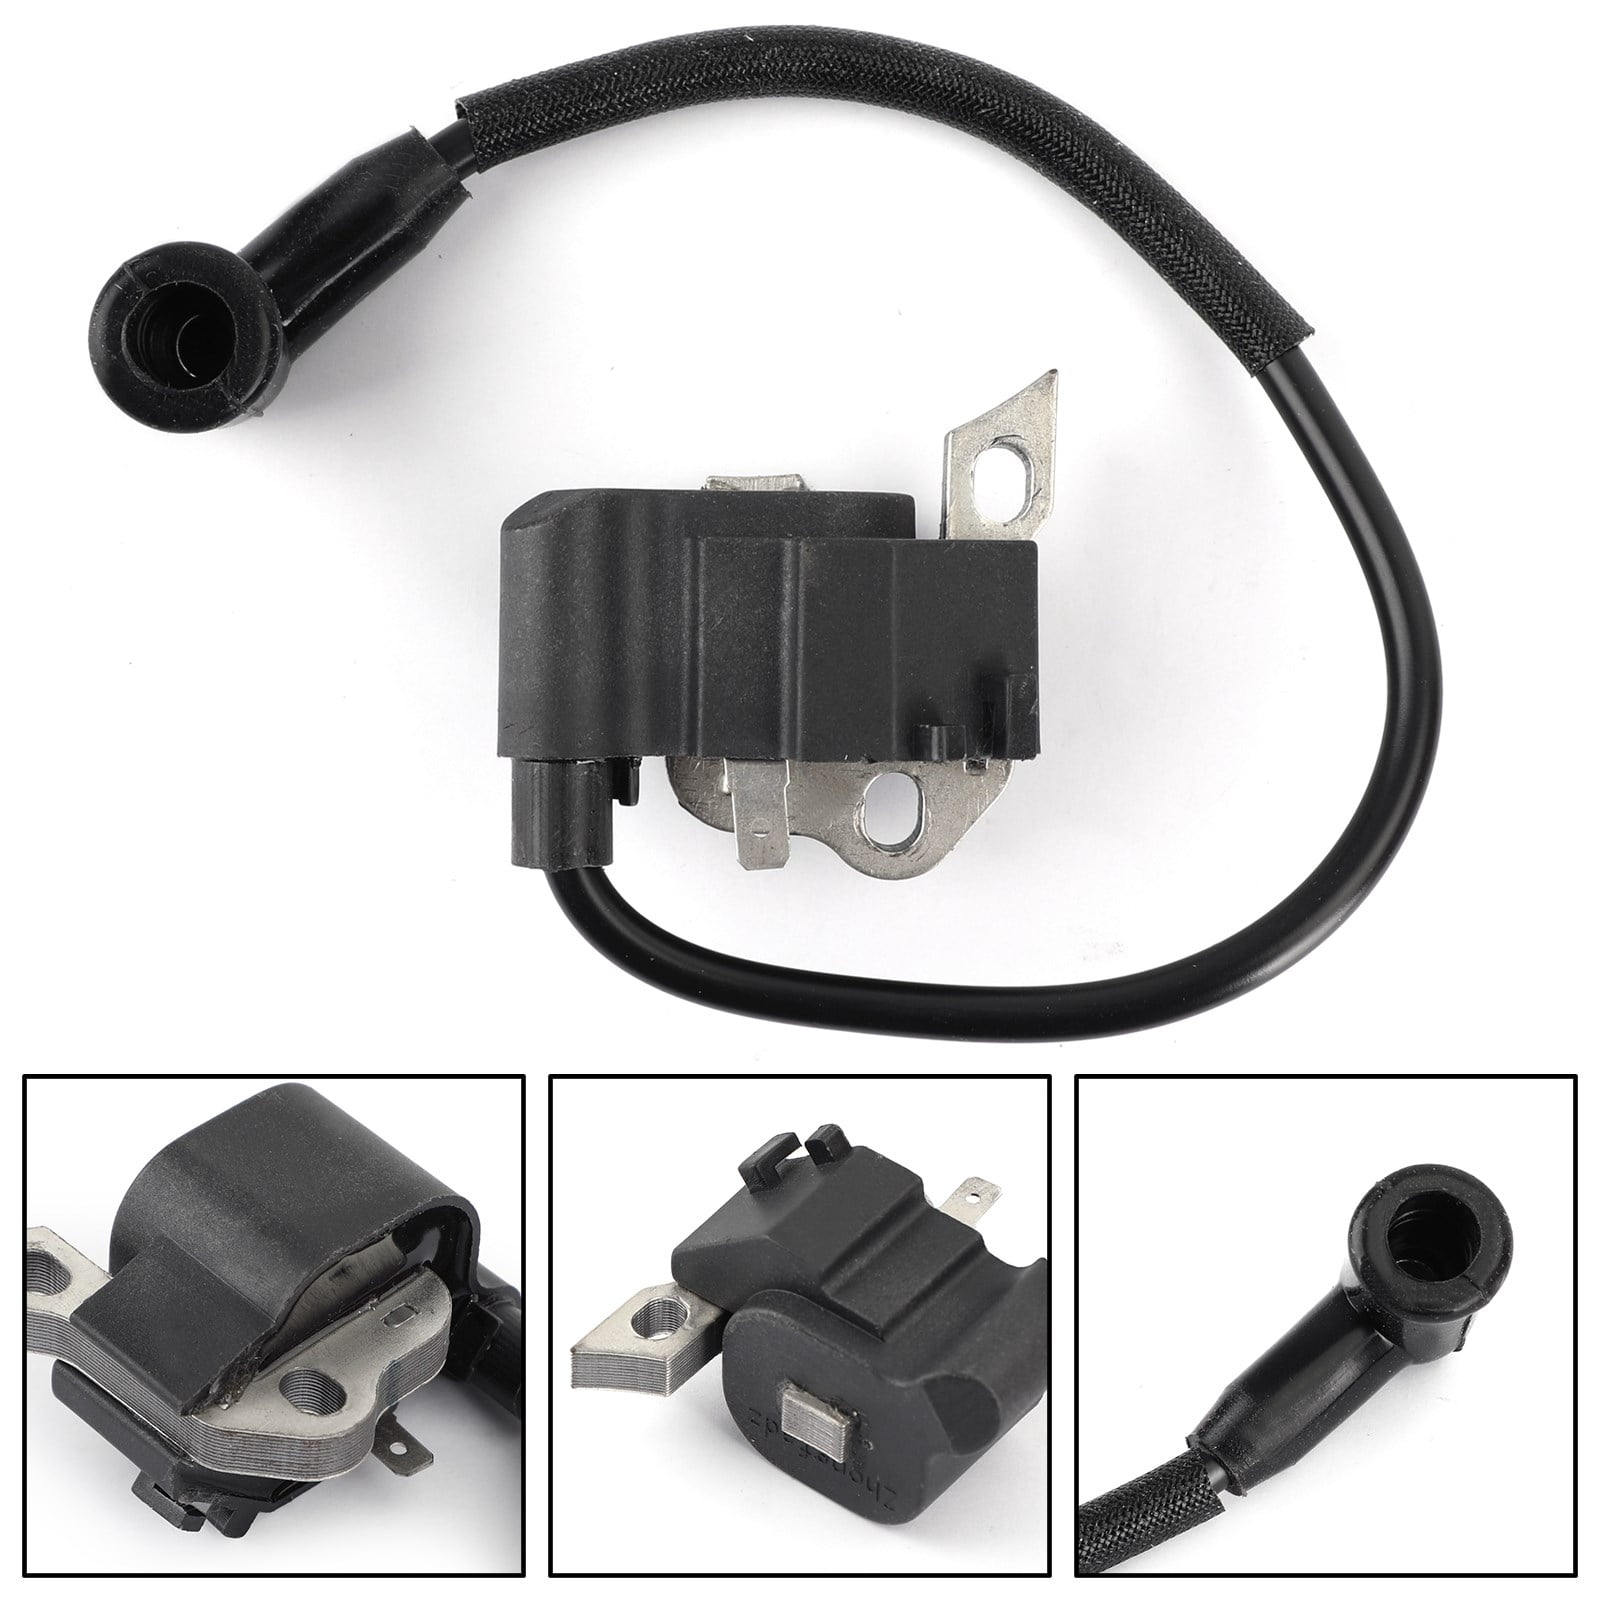 0000 400 1300 Ignition Coil Fits Stihl 029 039 MS290 MS390 Chainsaw